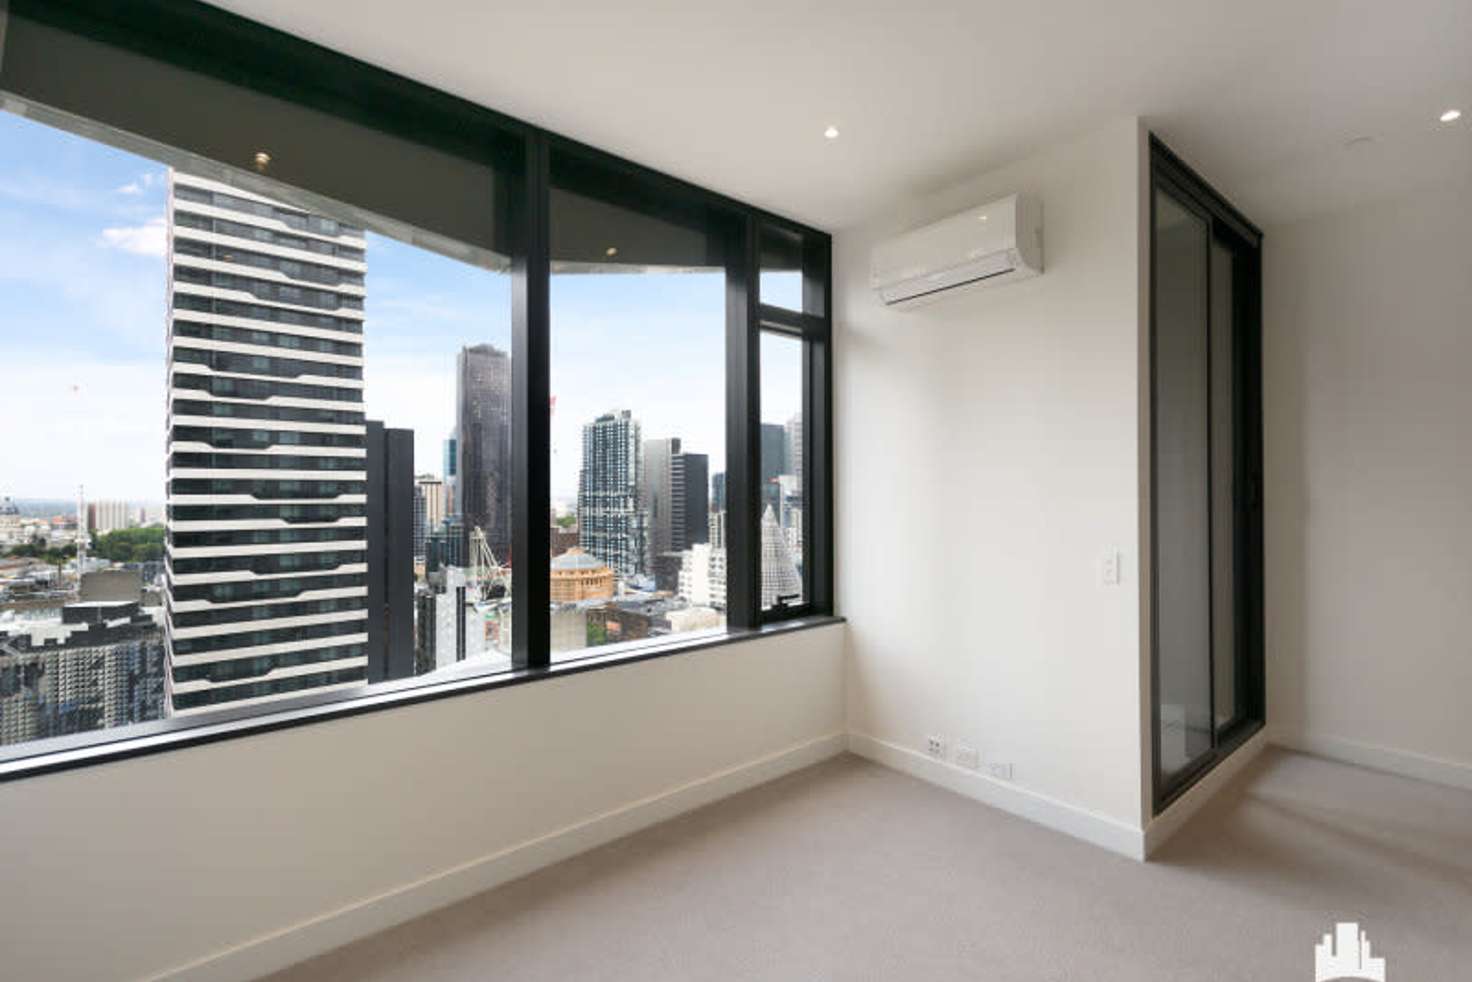 Main view of Homely apartment listing, 2108/120 Abeckett Street, Melbourne VIC 3000